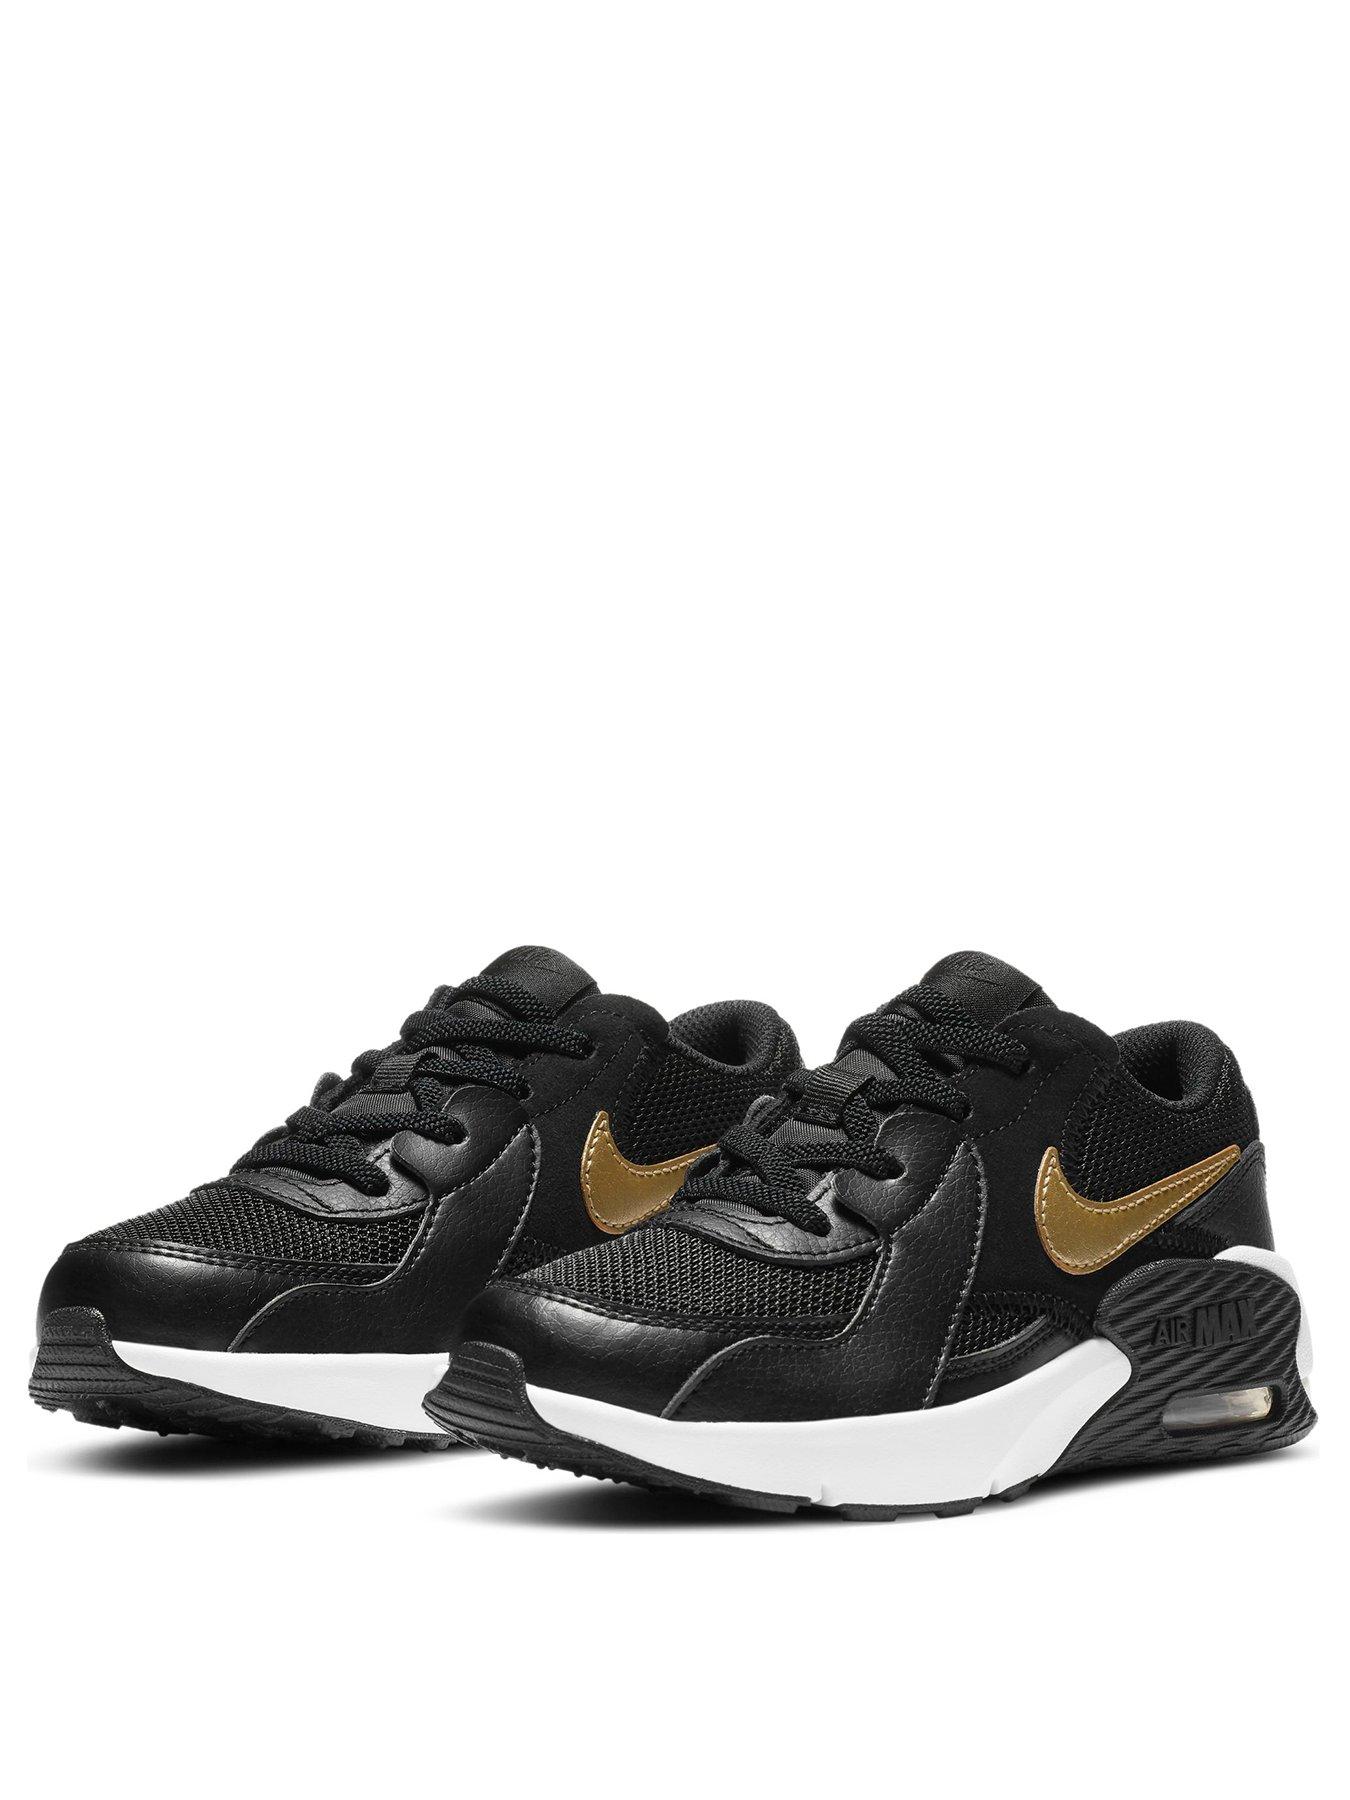 Kids Air Max Excee Childrens Trainer - Black/Gold